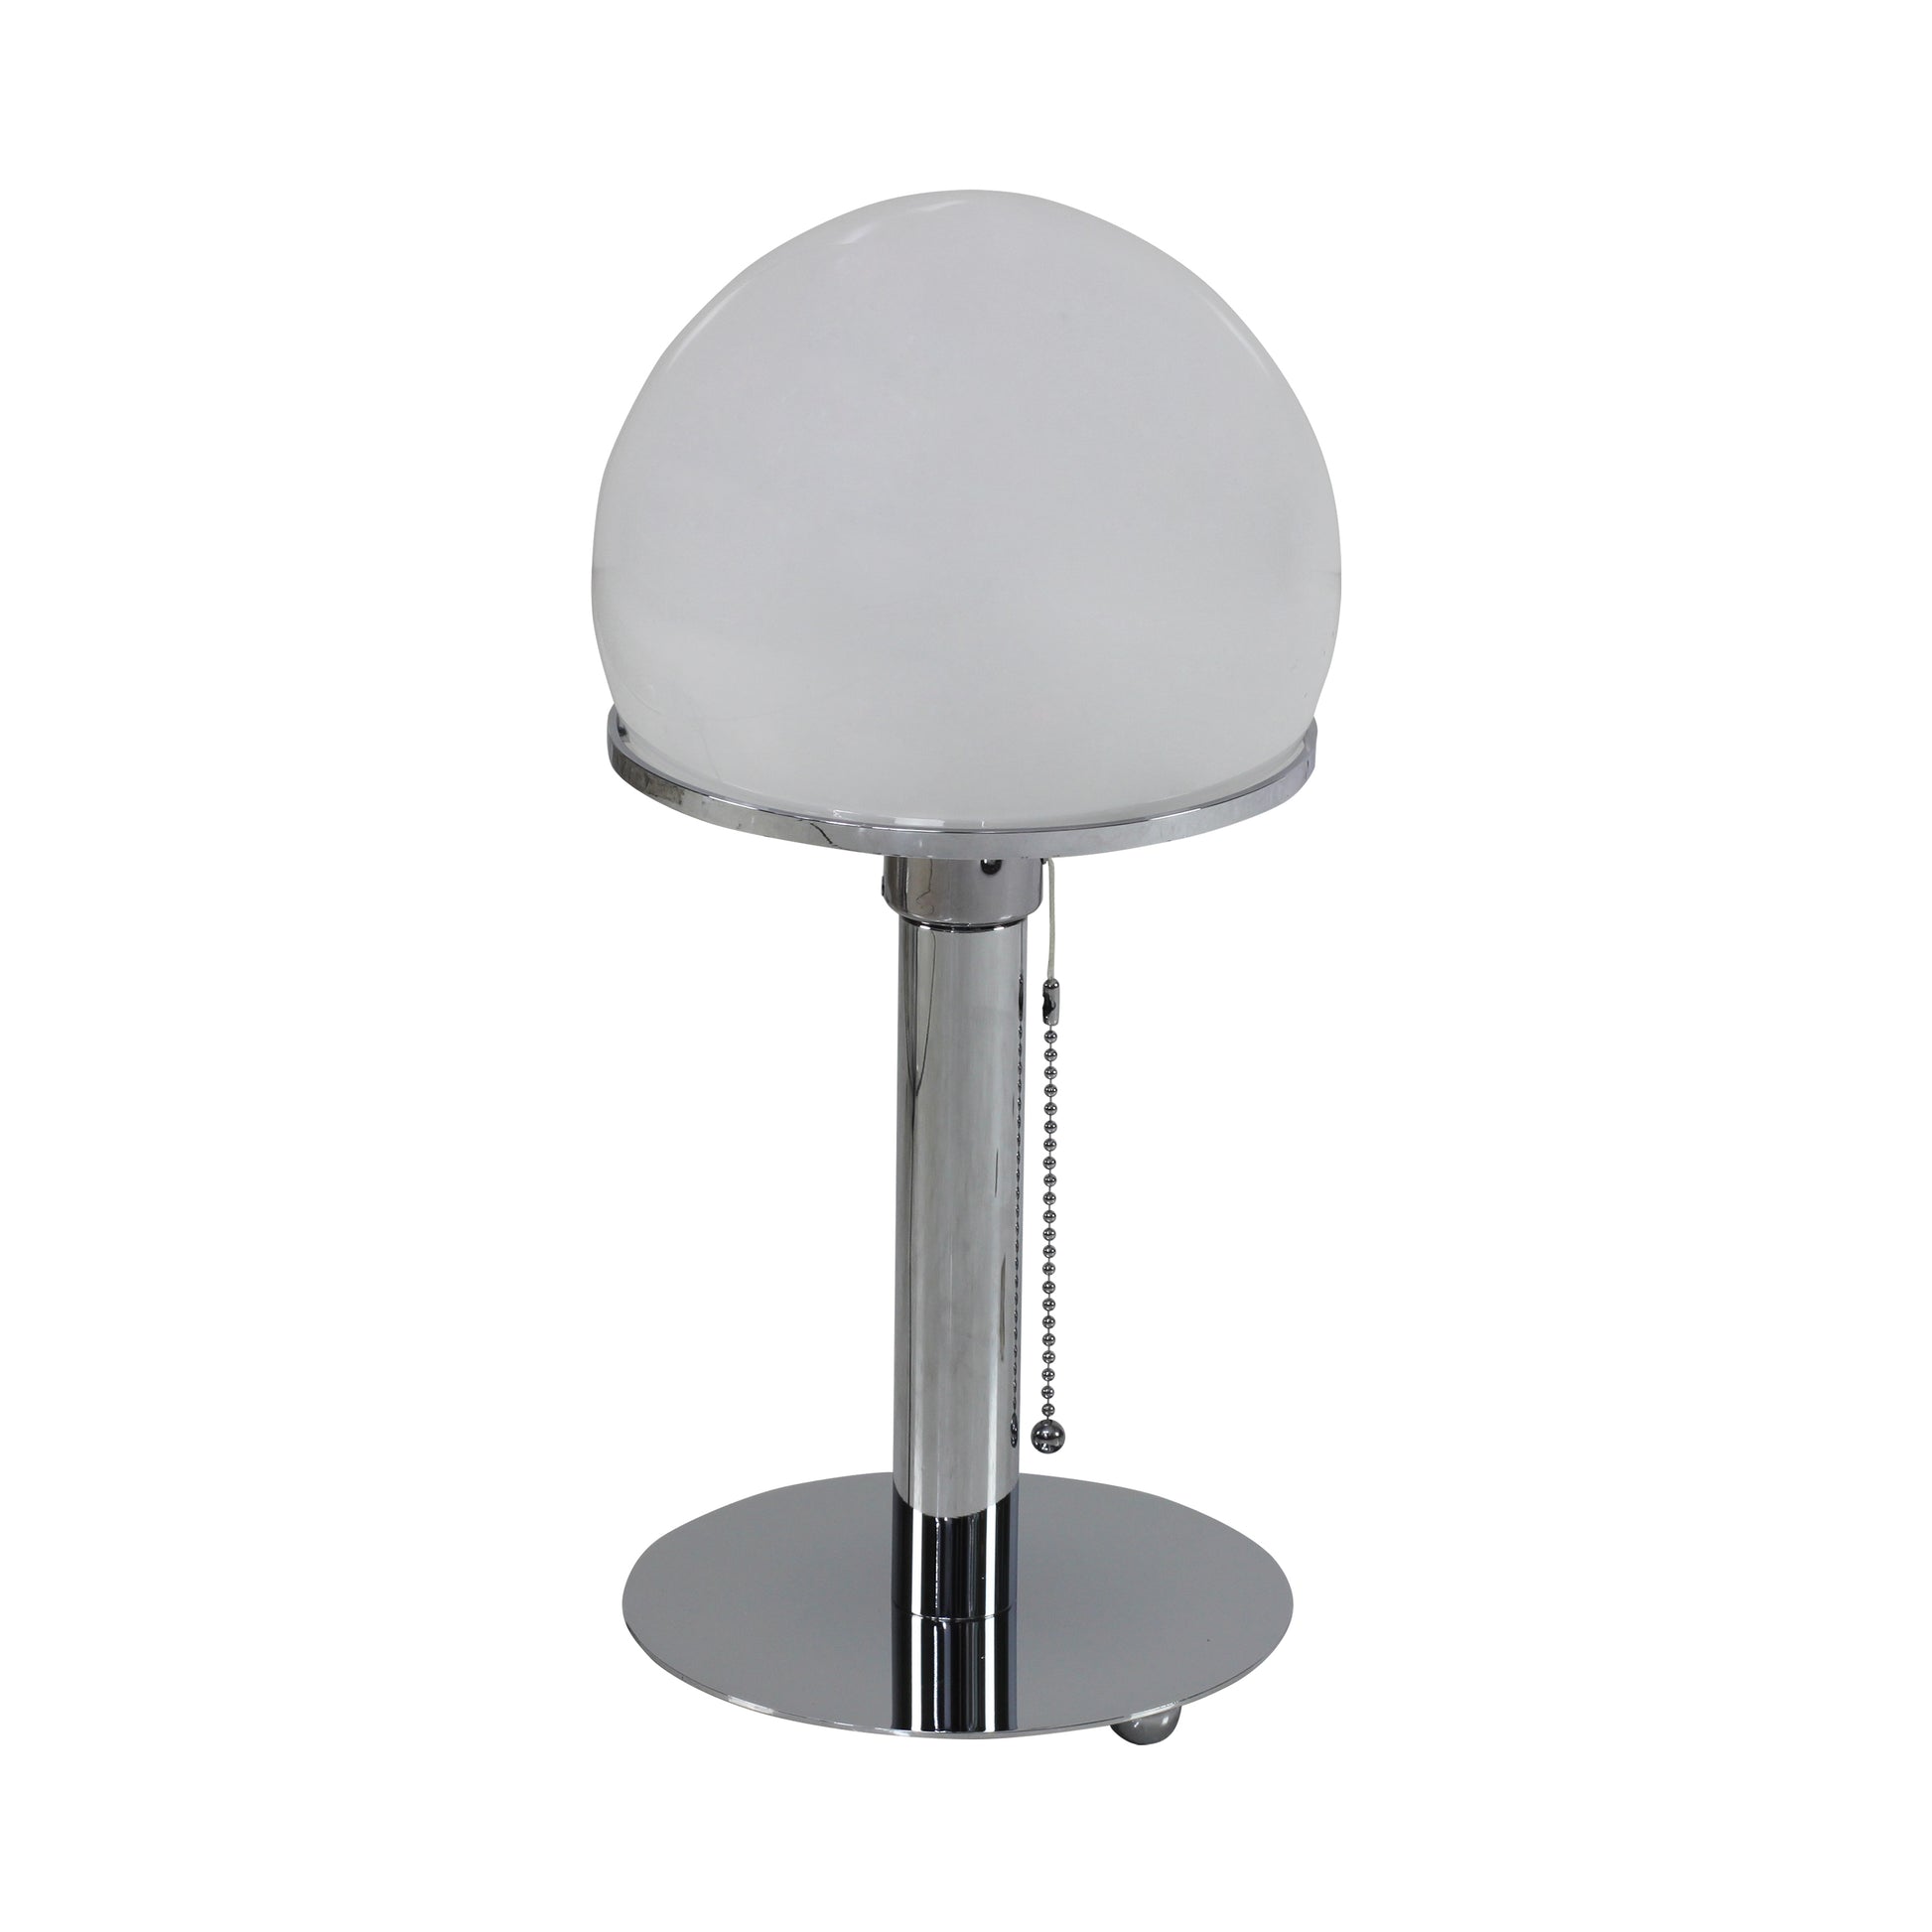 Wagenfeld lamp style | Front